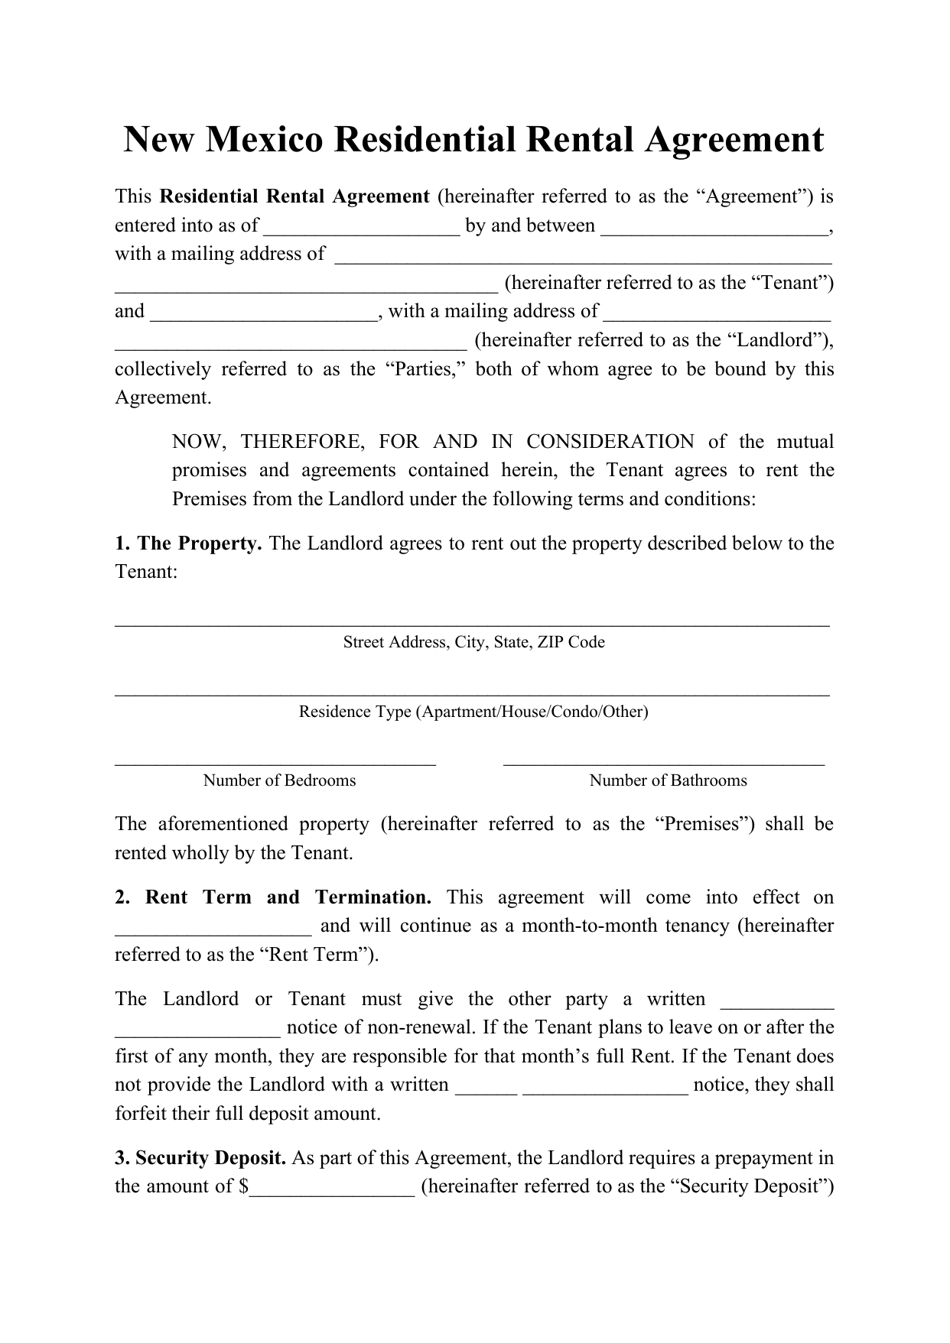 Residential Rental Agreement Template - New Mexico, Page 1